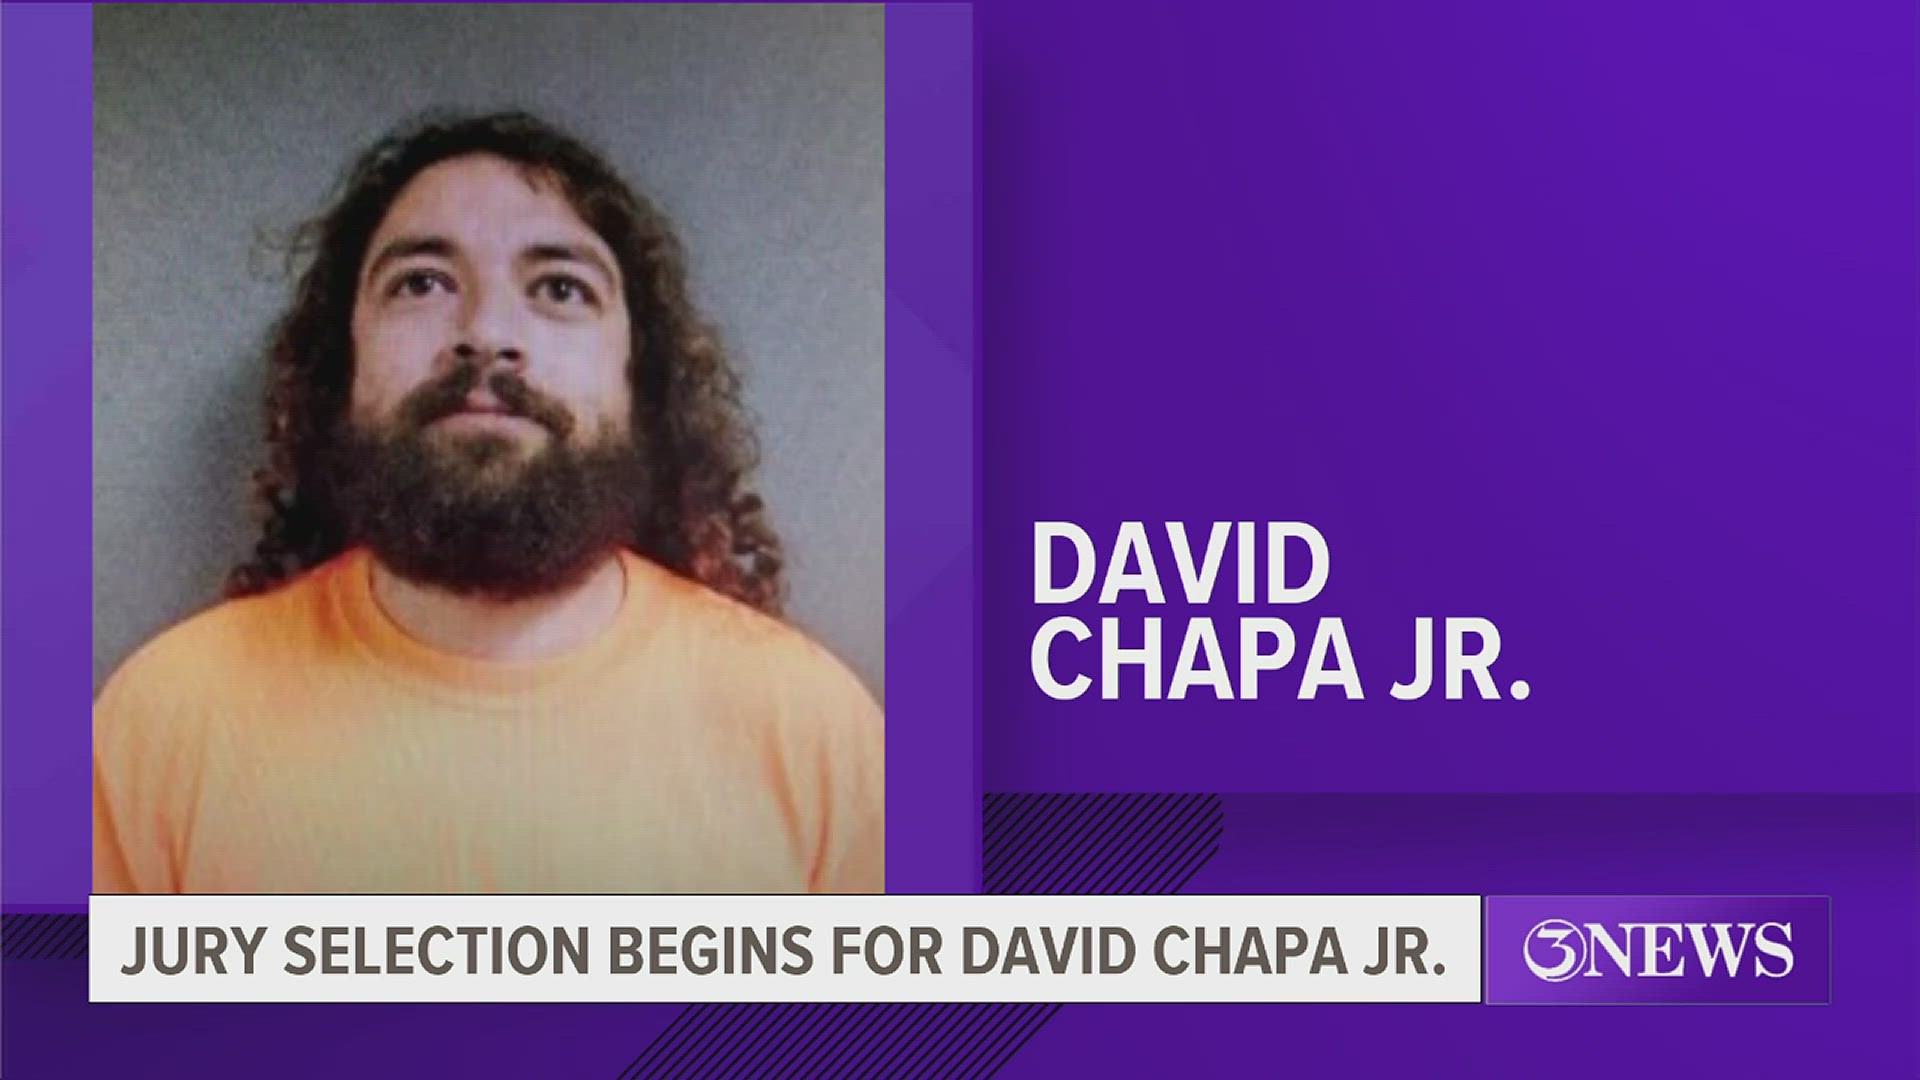 Chapa is accused of killing Robert Leija back in 2021, when the two were engaged in an argument where Chapa shot Leija -- who died on the scene.